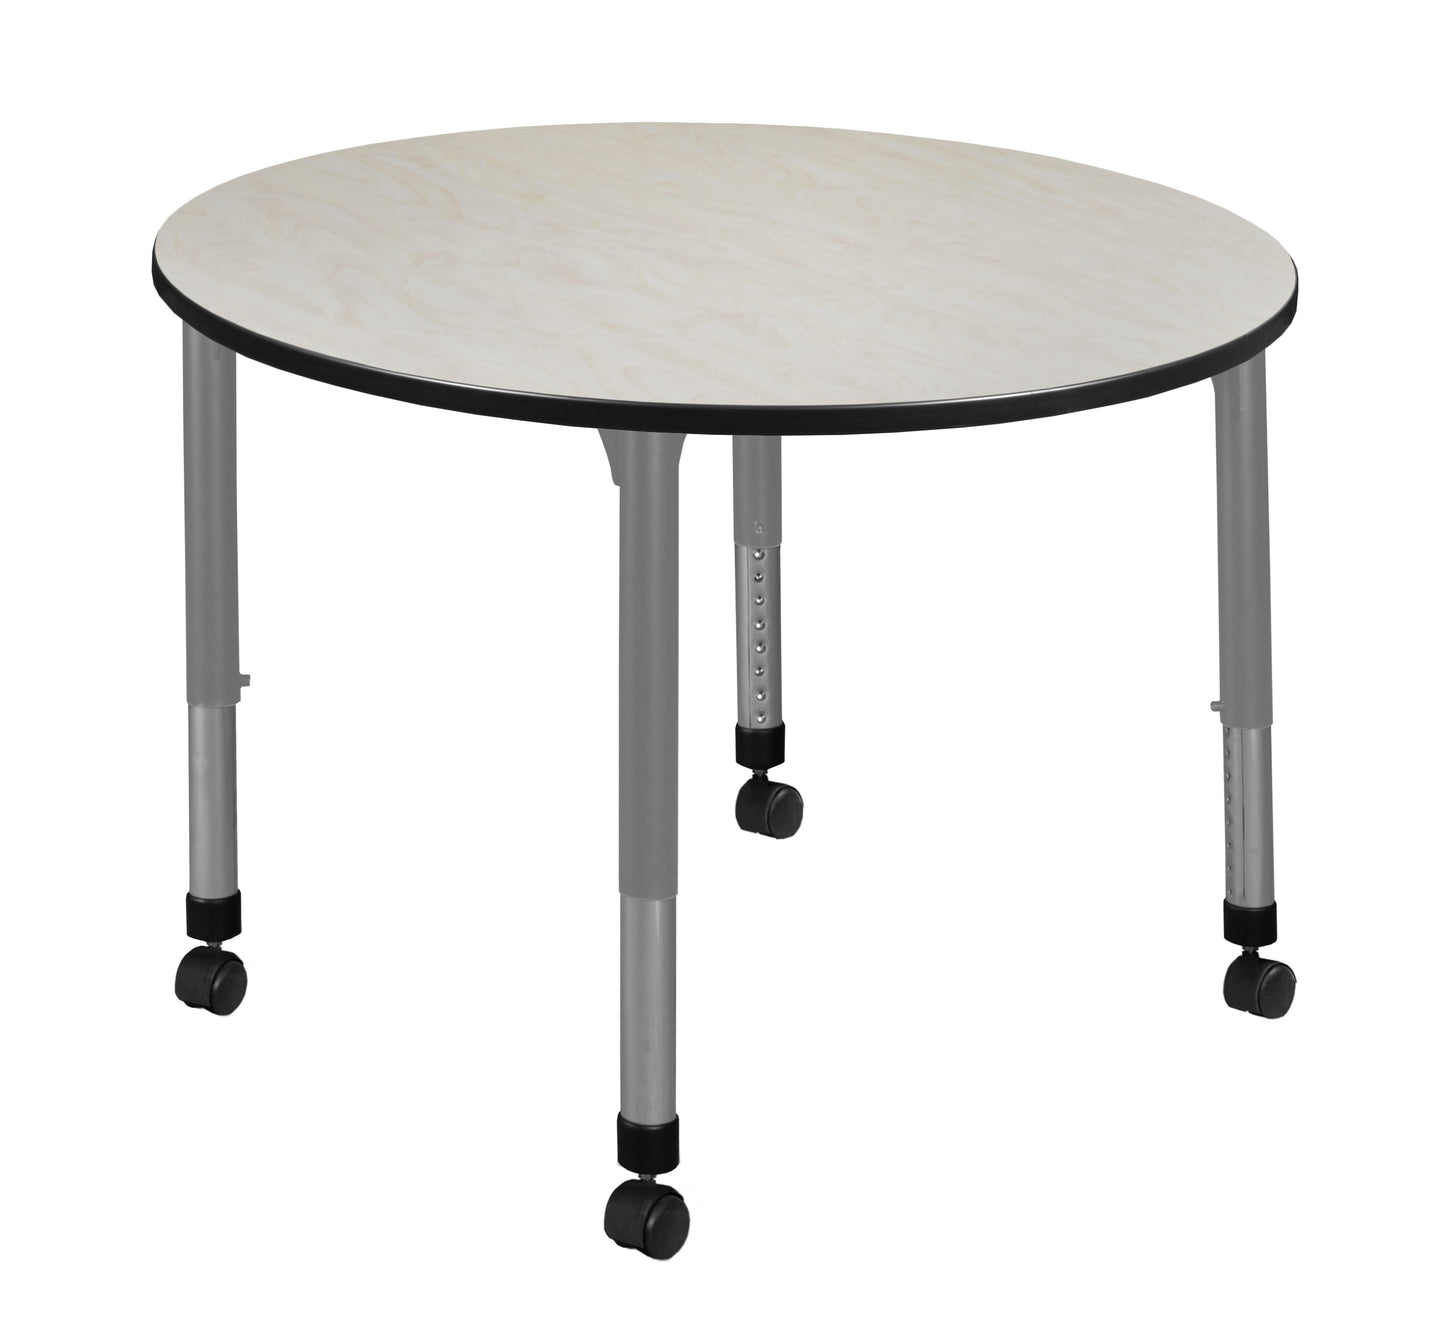 Regency Kee 48 in. Round Height Adjustable Mobile Classroom Activity Table